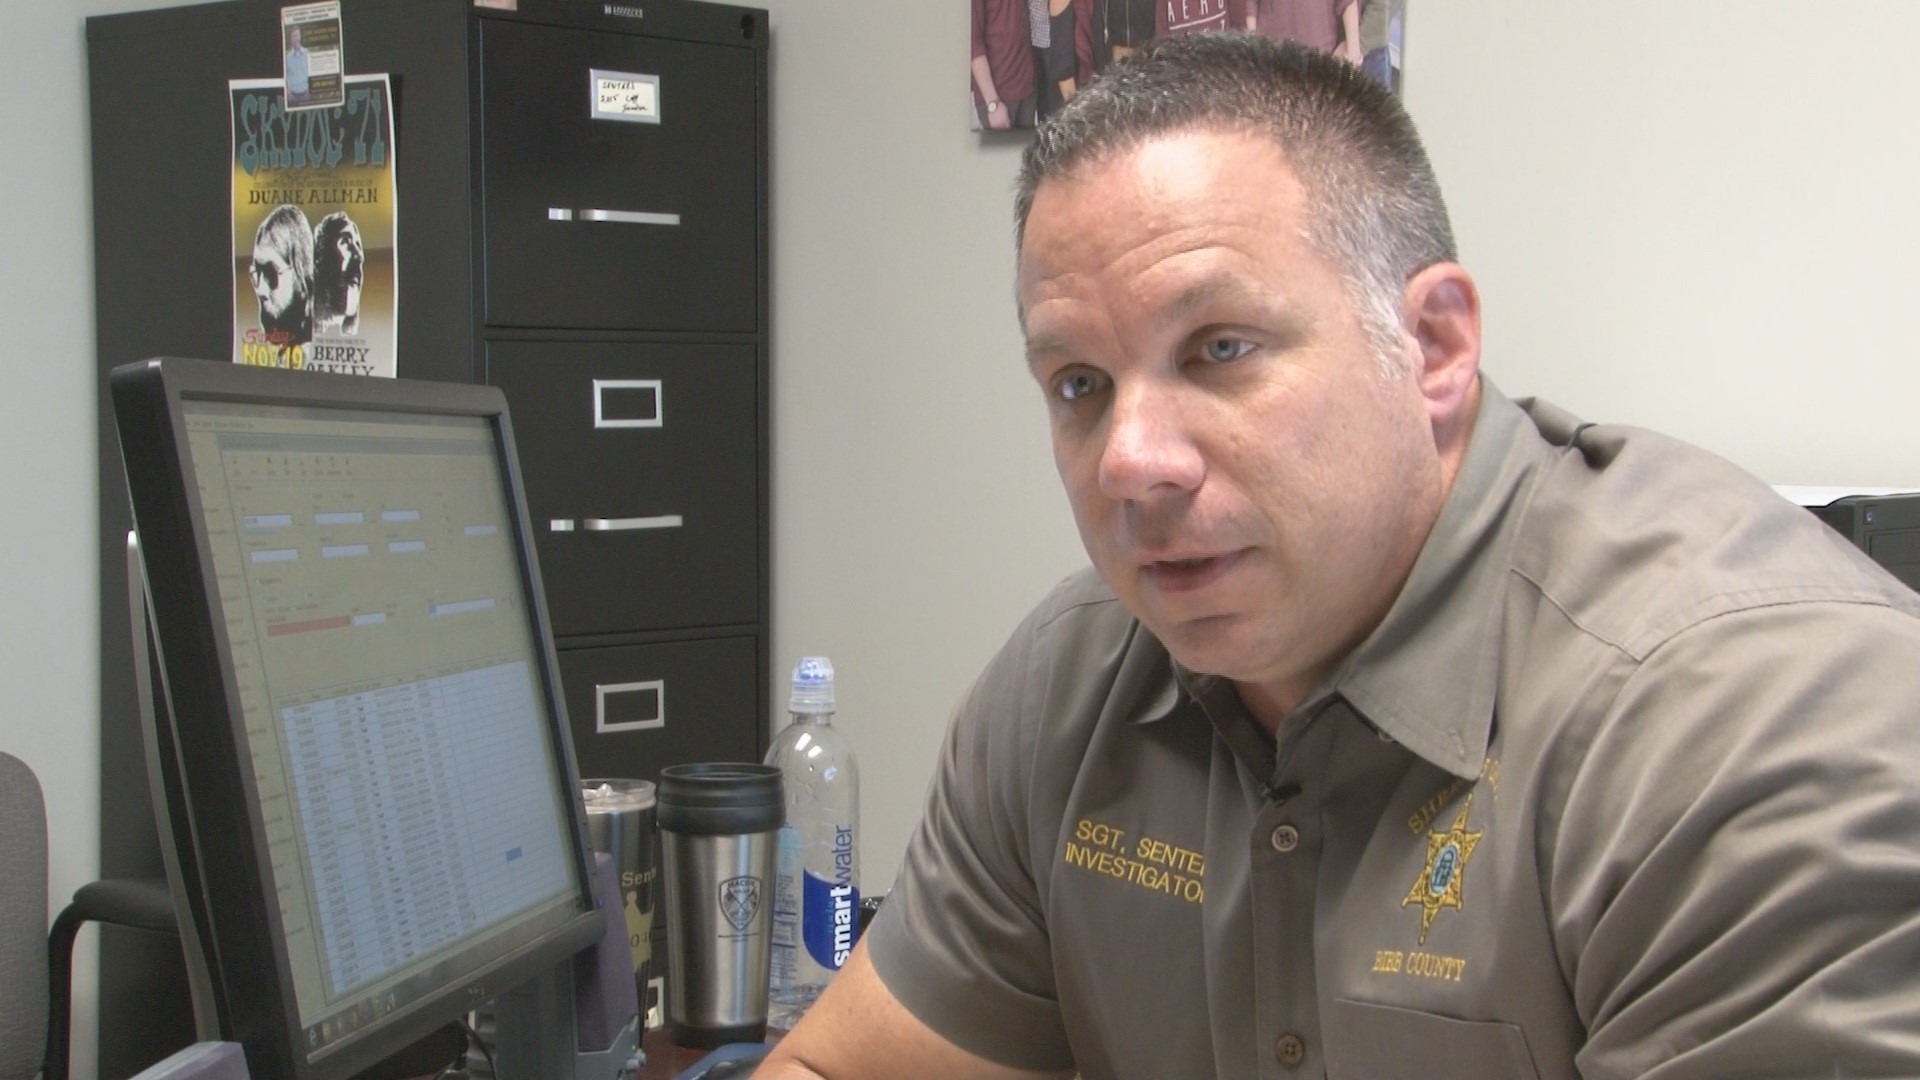 On Wednesday, Macon-Bibb Mayor Robert Reichert vetoed a proposal to give all of the county’s employees $1,000 bonuses. Sgt. Richard Senter says decisions like these are driving people away.